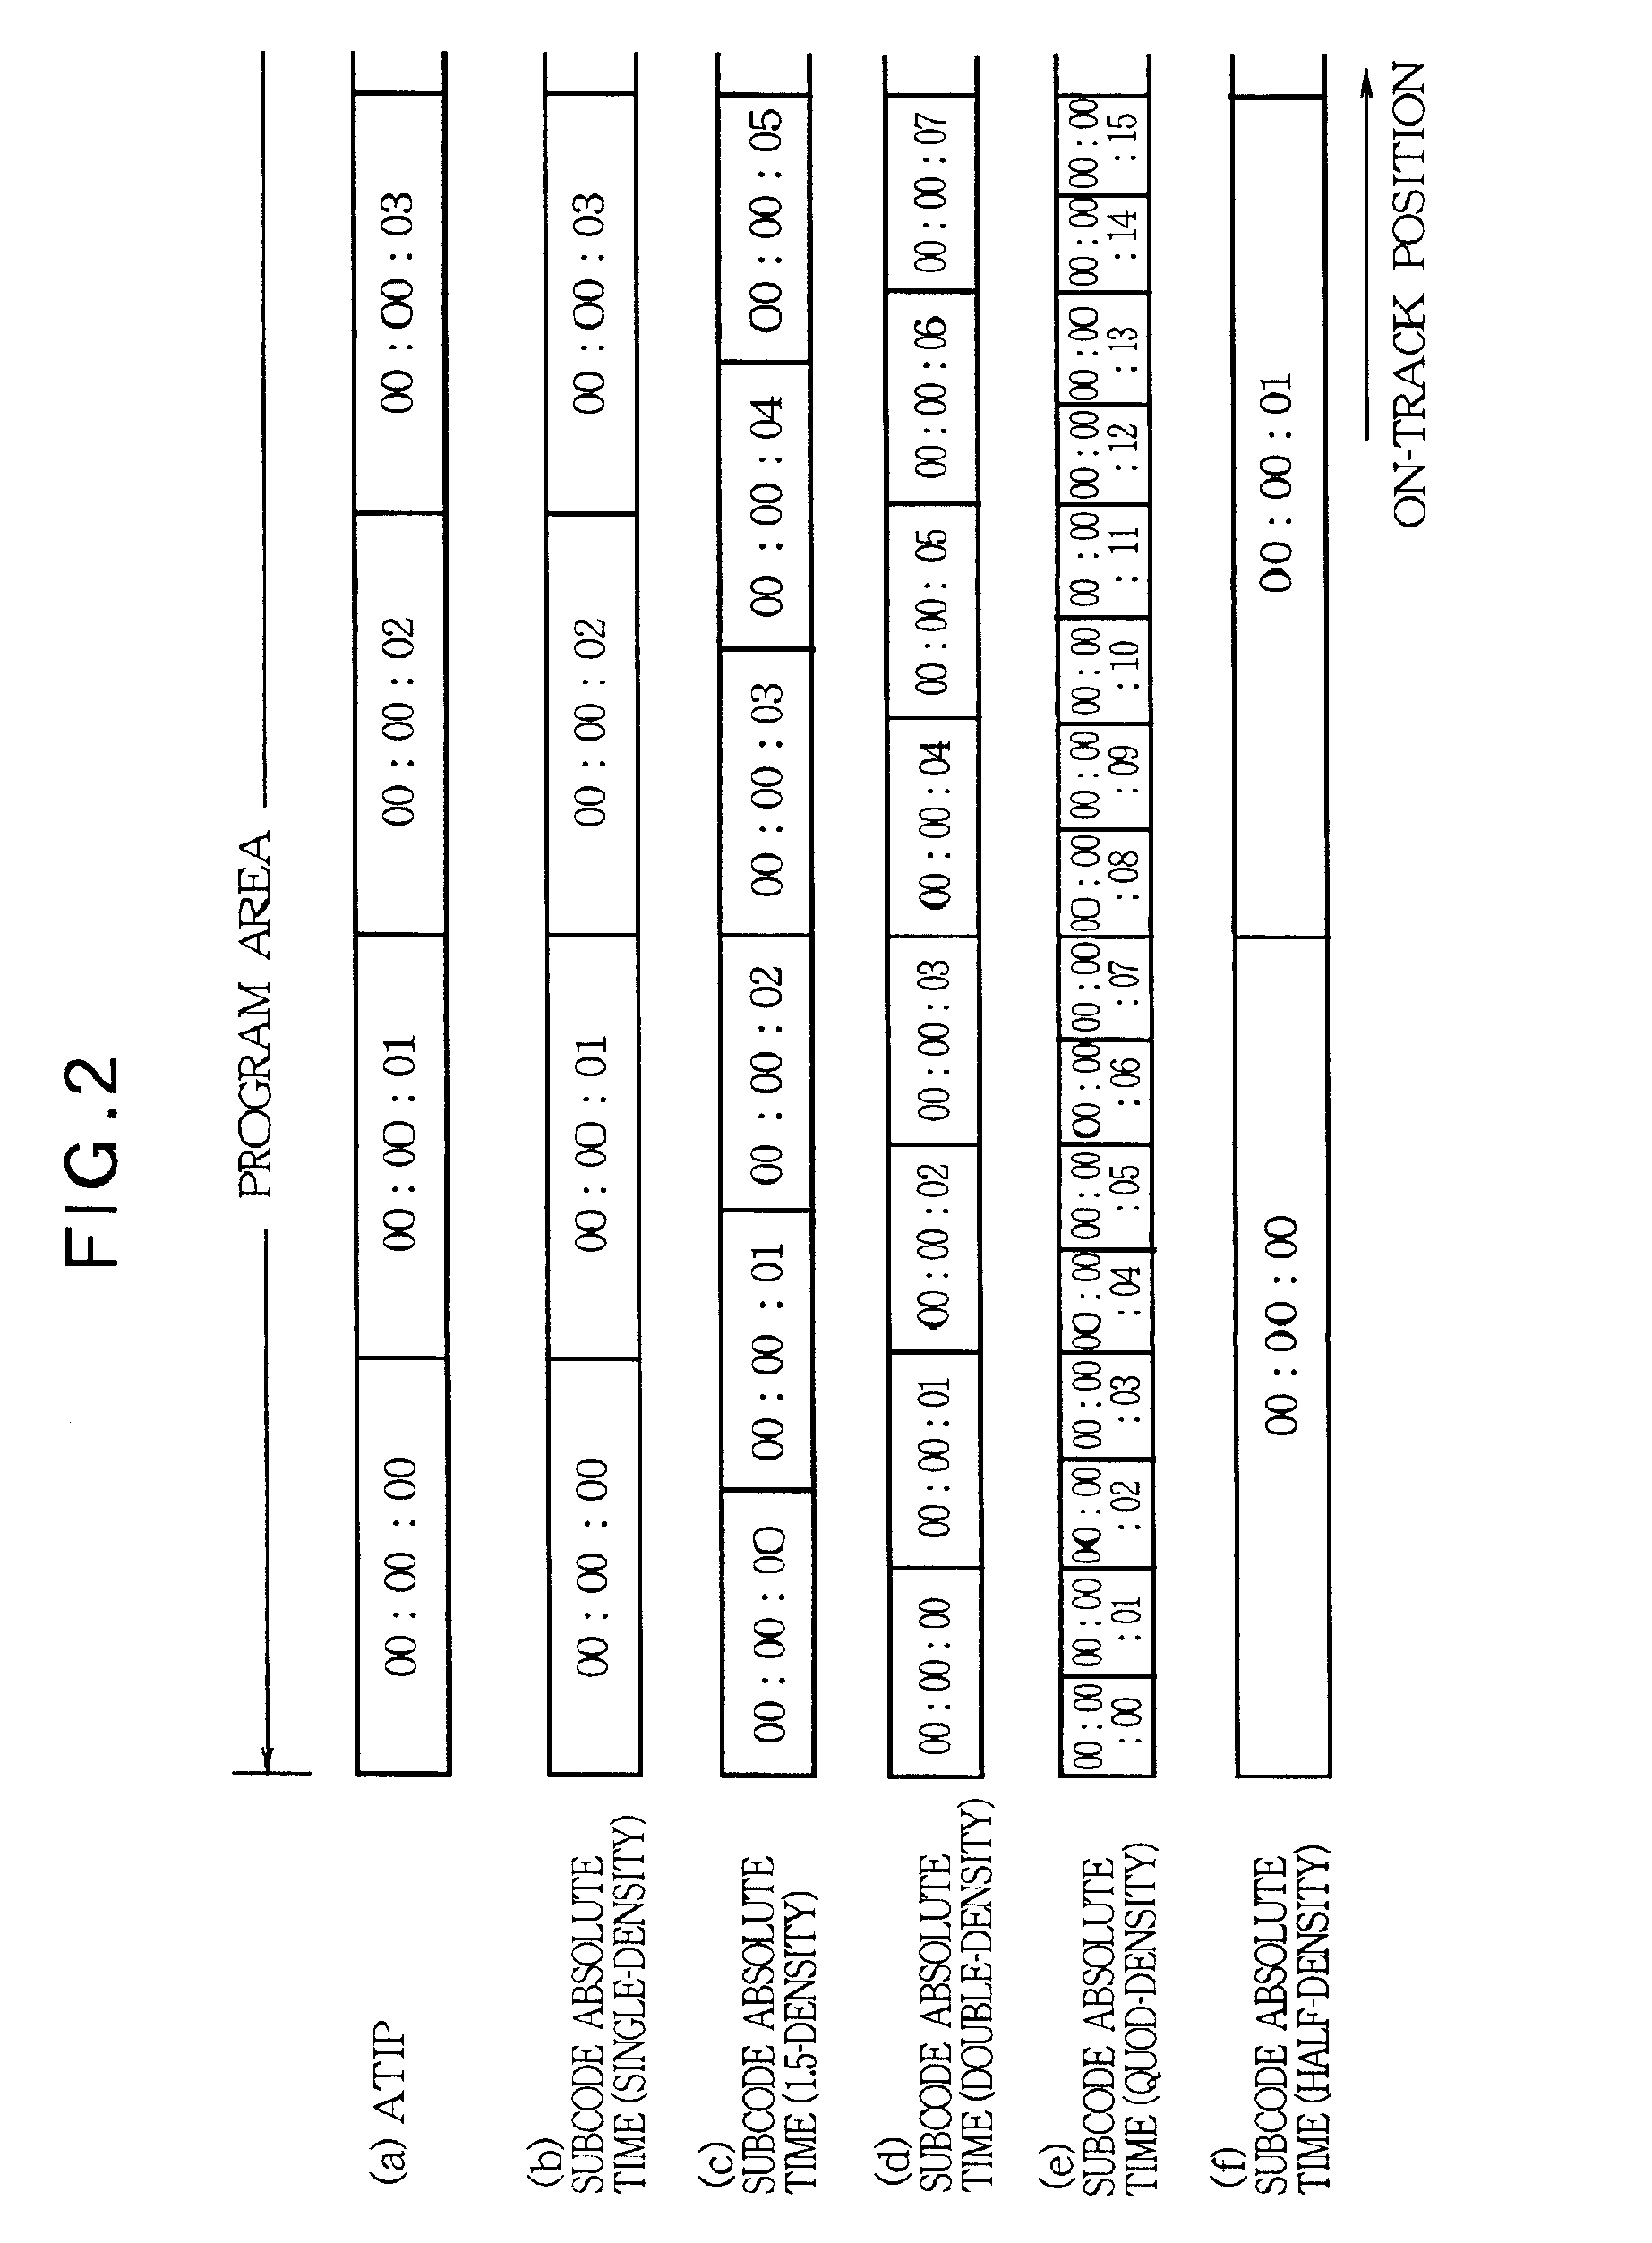 Optical disk recorder for writing data with variable density